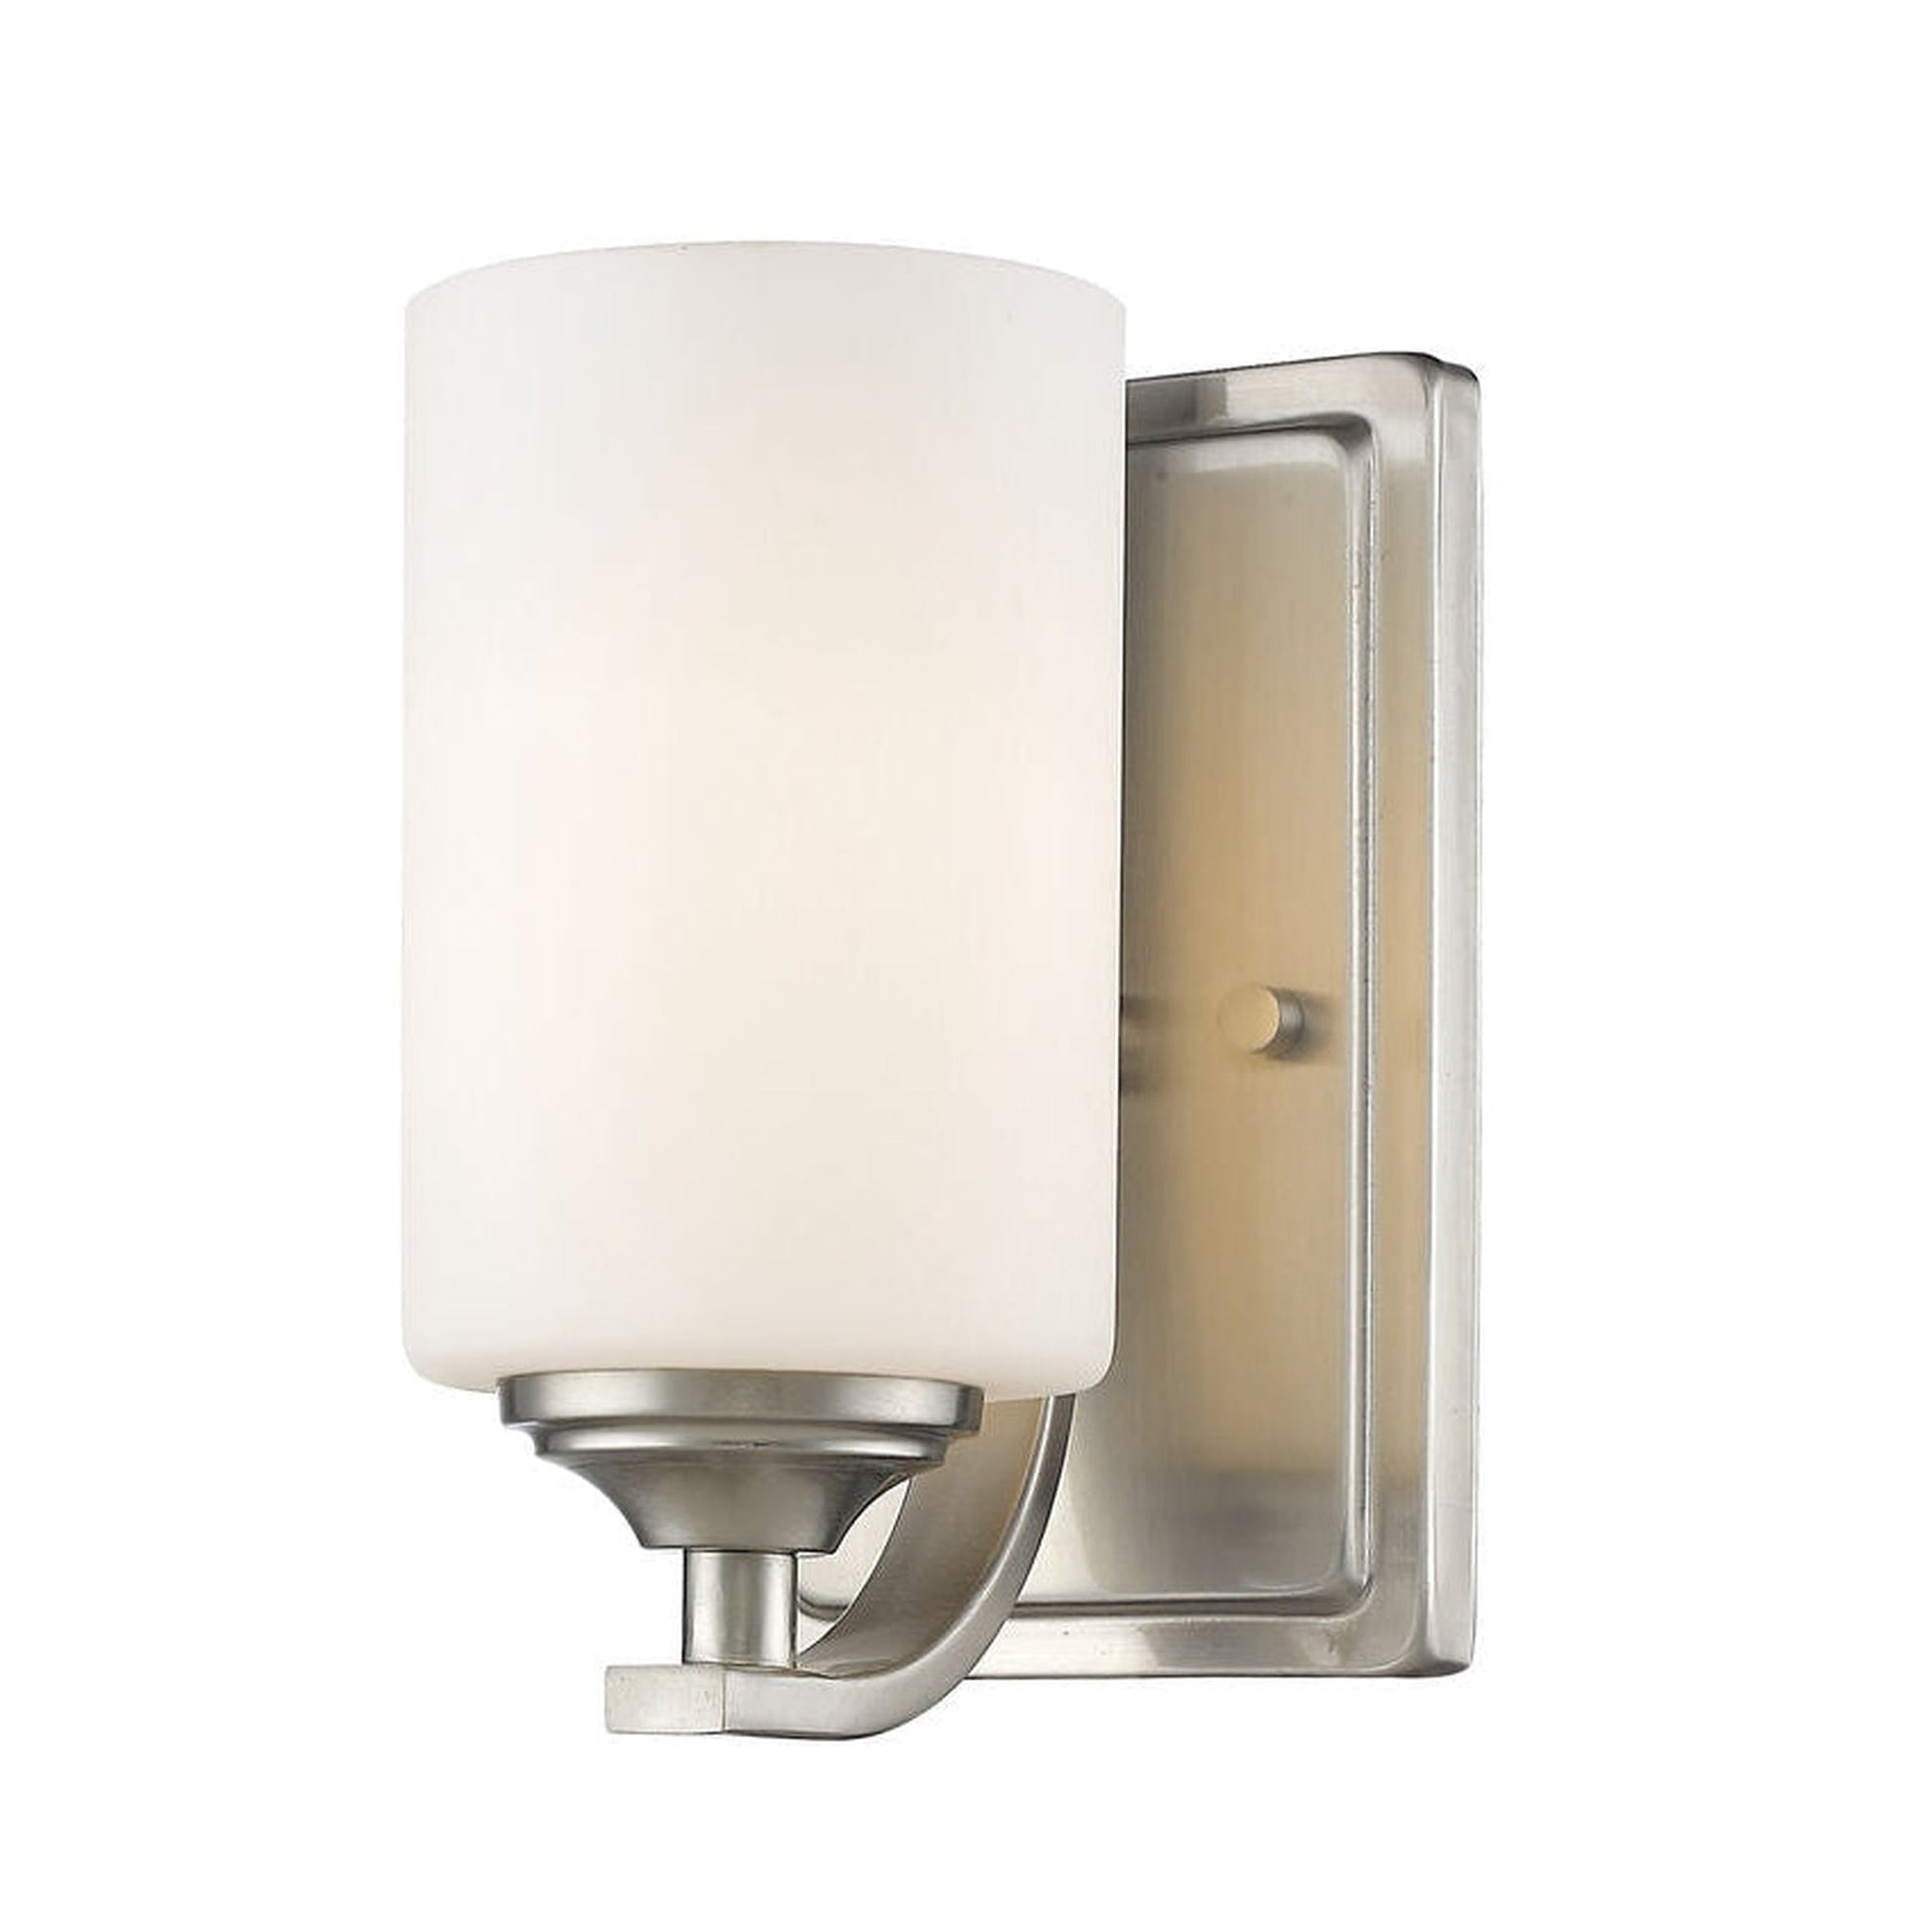 Z-Lite Bordeaux 5" 1-Light Brushed Nickel Wall Sconce With Matte Opal Glass Shade